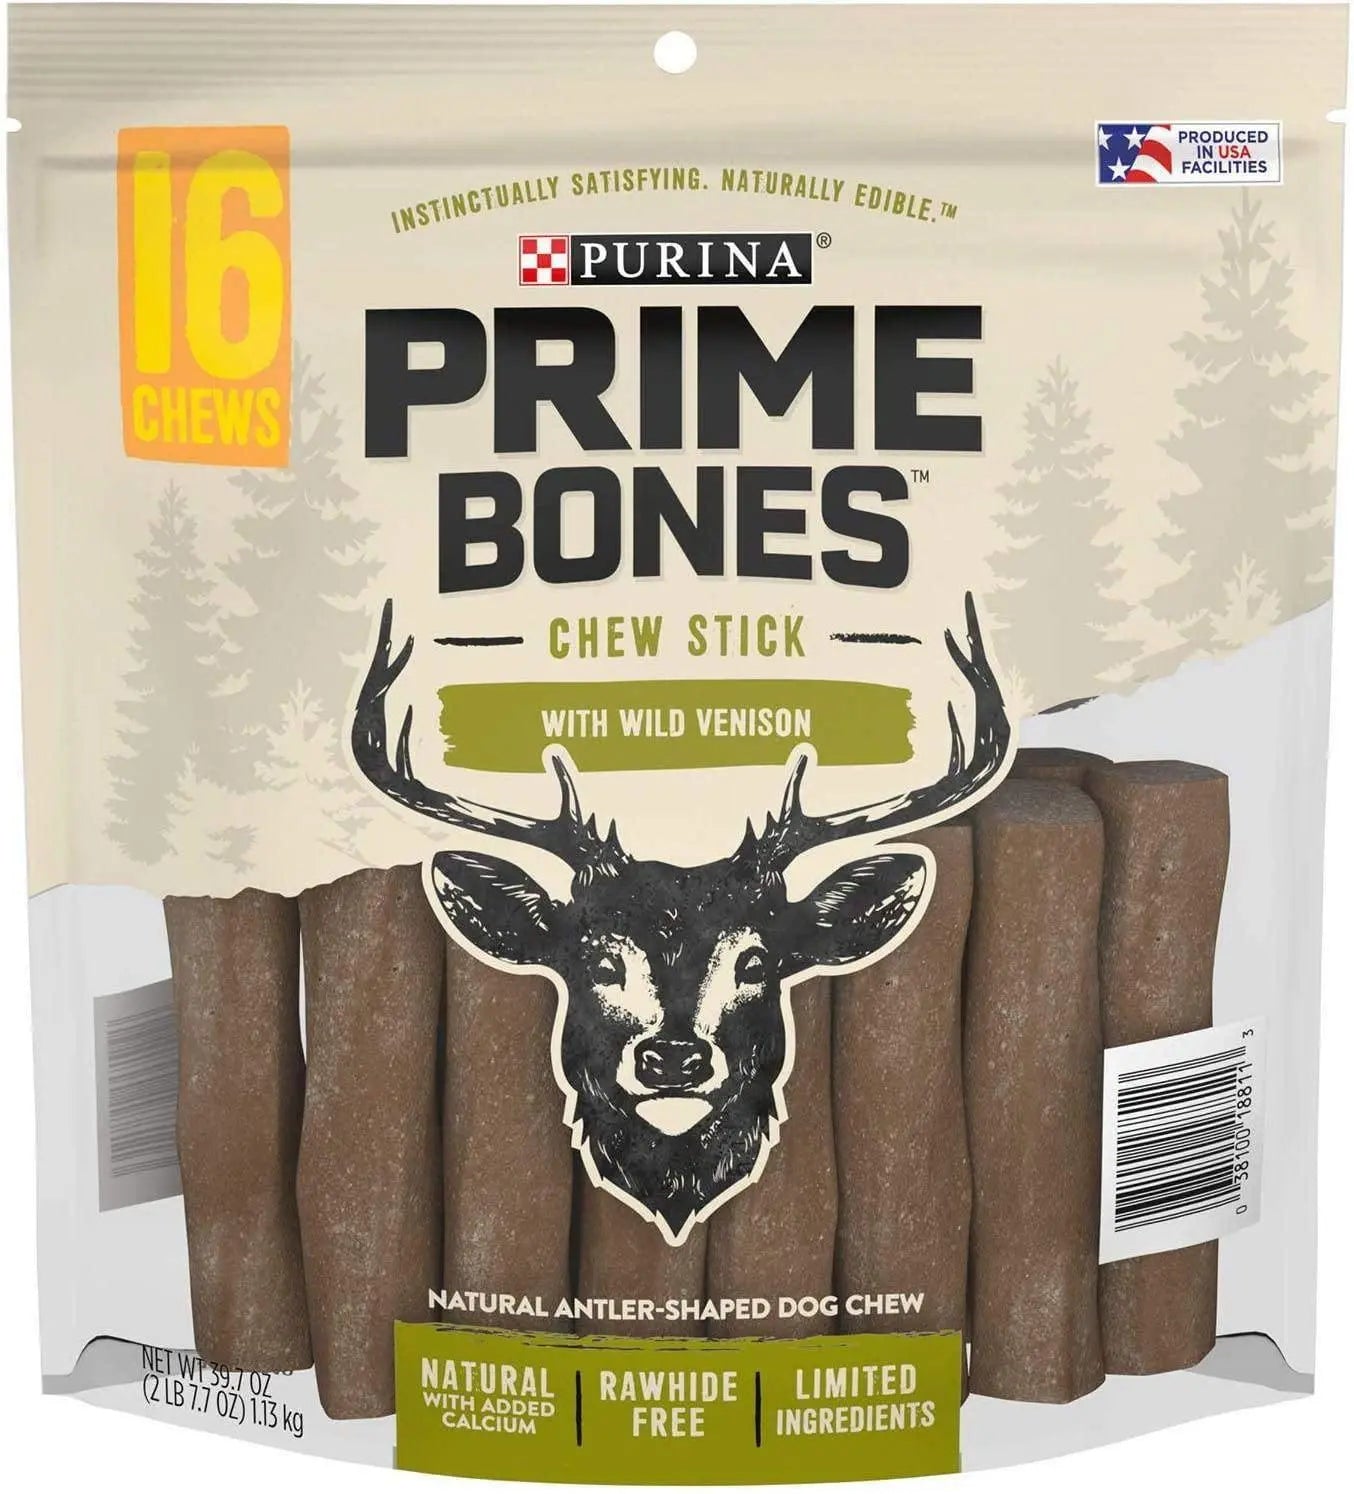 Wholesale prices with free shipping all over United States Purina Prime Bones Chew Stick with Wild Venison (16 chews) - Steven Deals